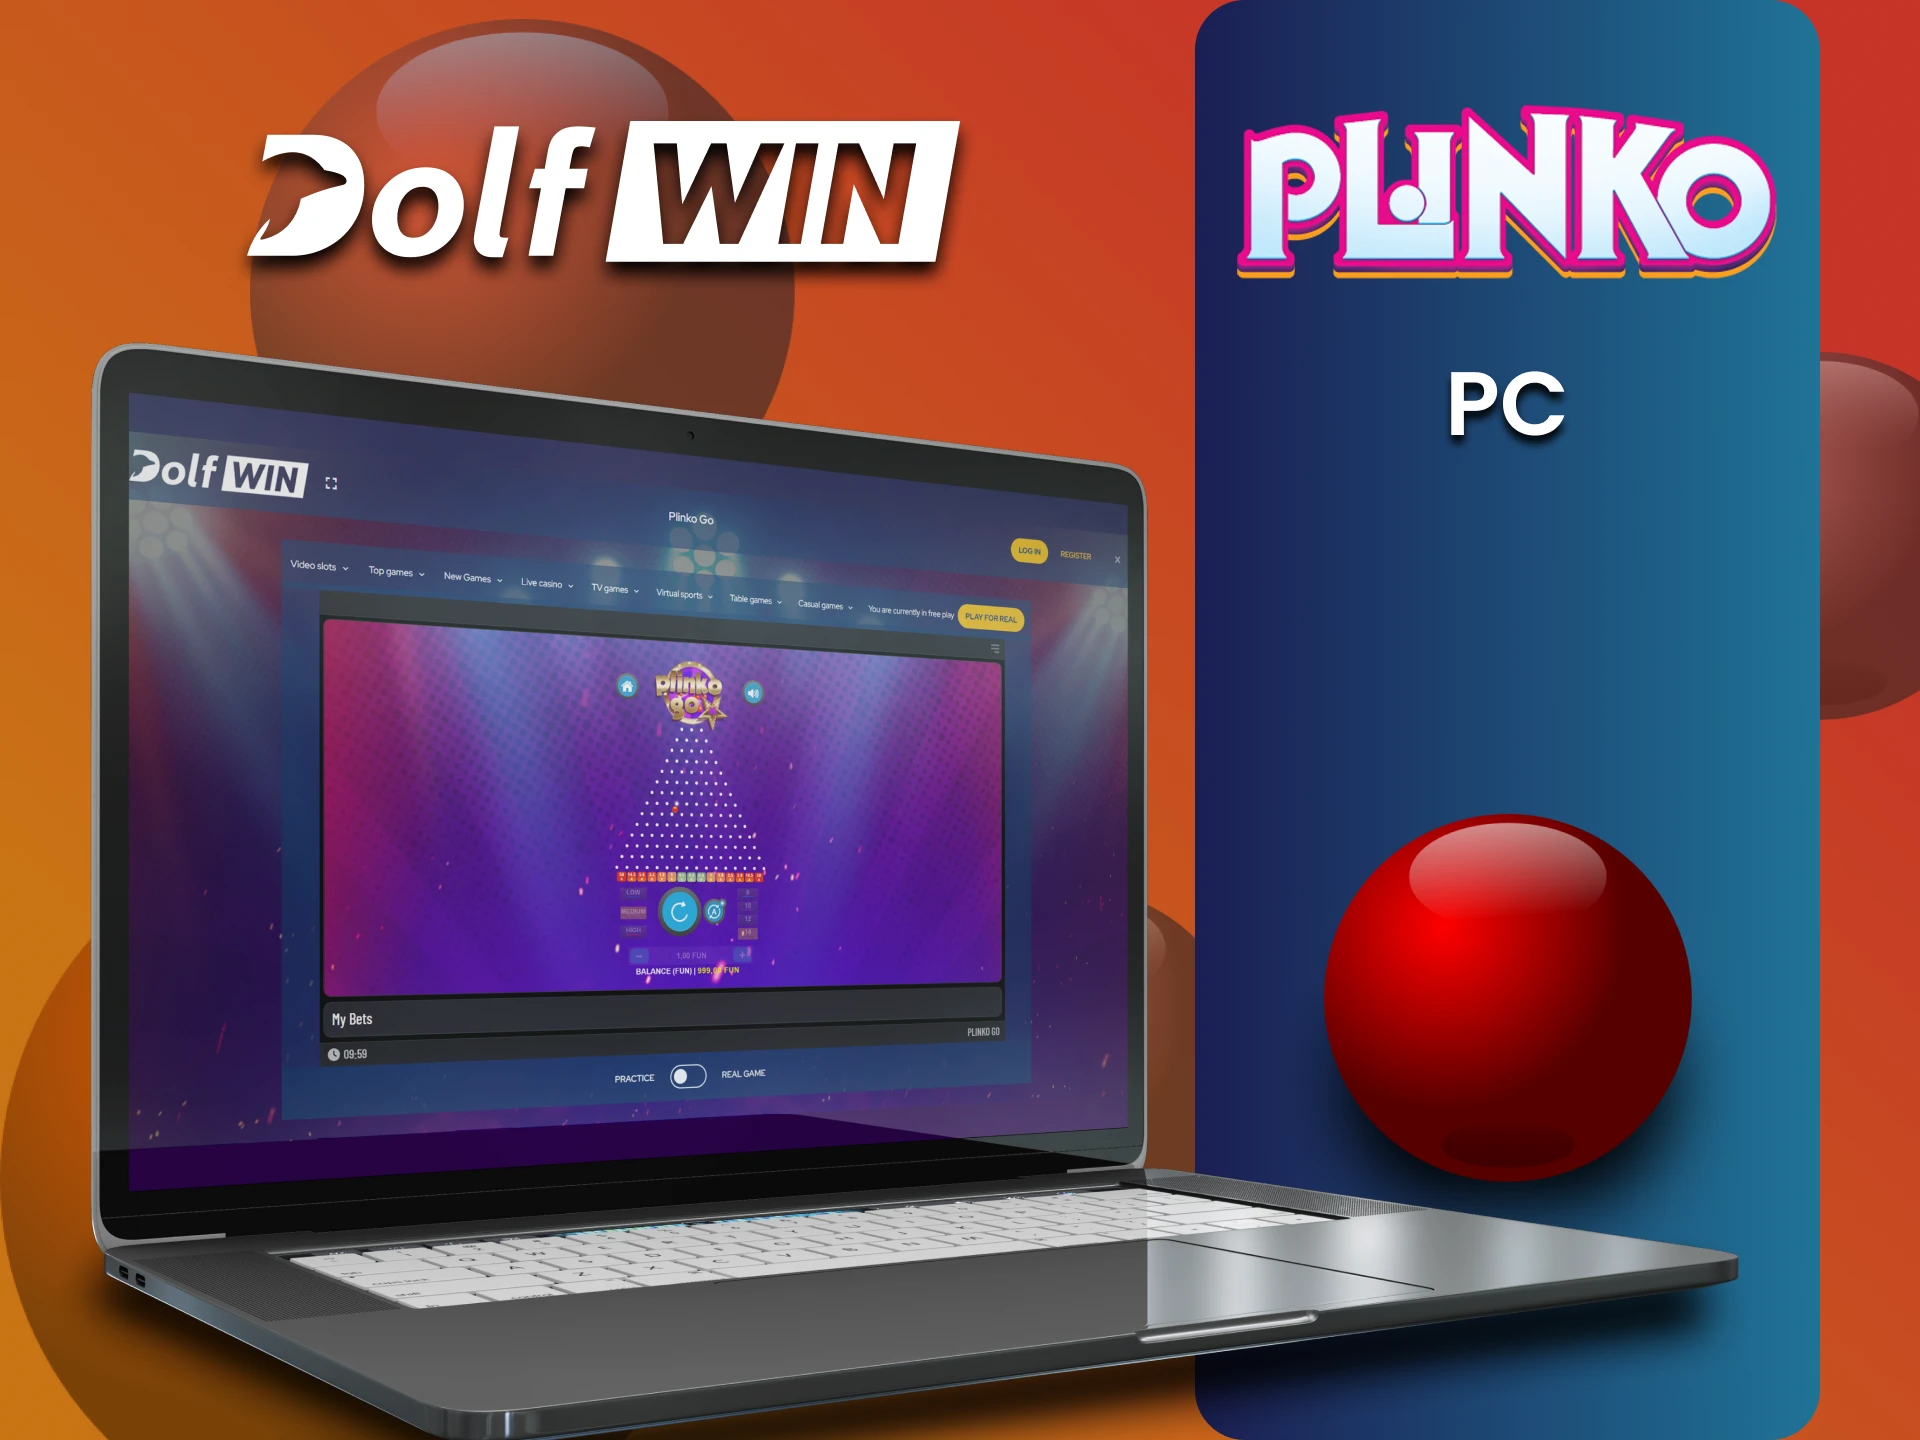 PC is one of the ways to play Plinko on the Dolfwin website.